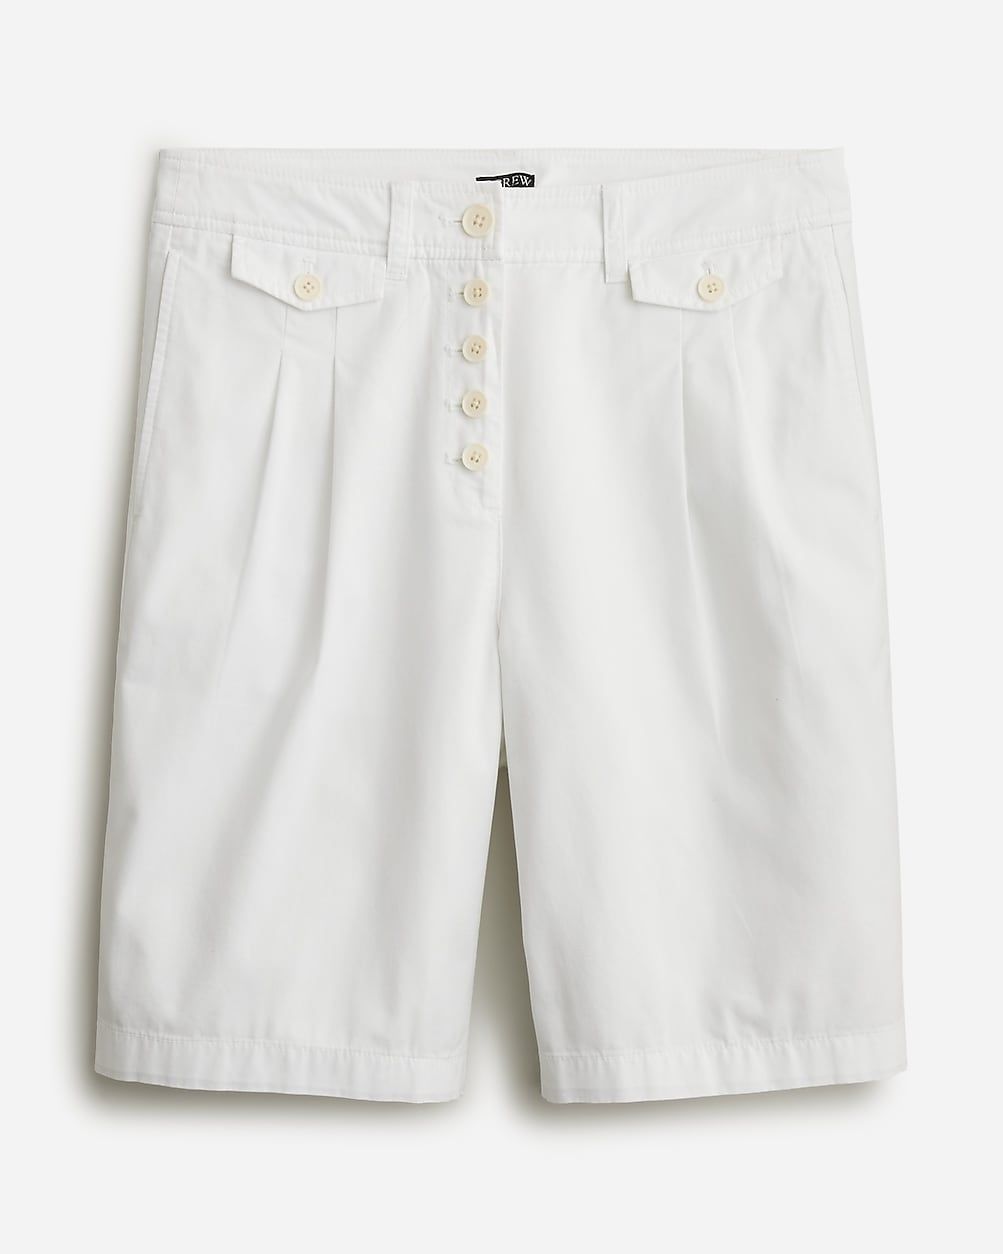 Pleated button-front short in chino | J.Crew US